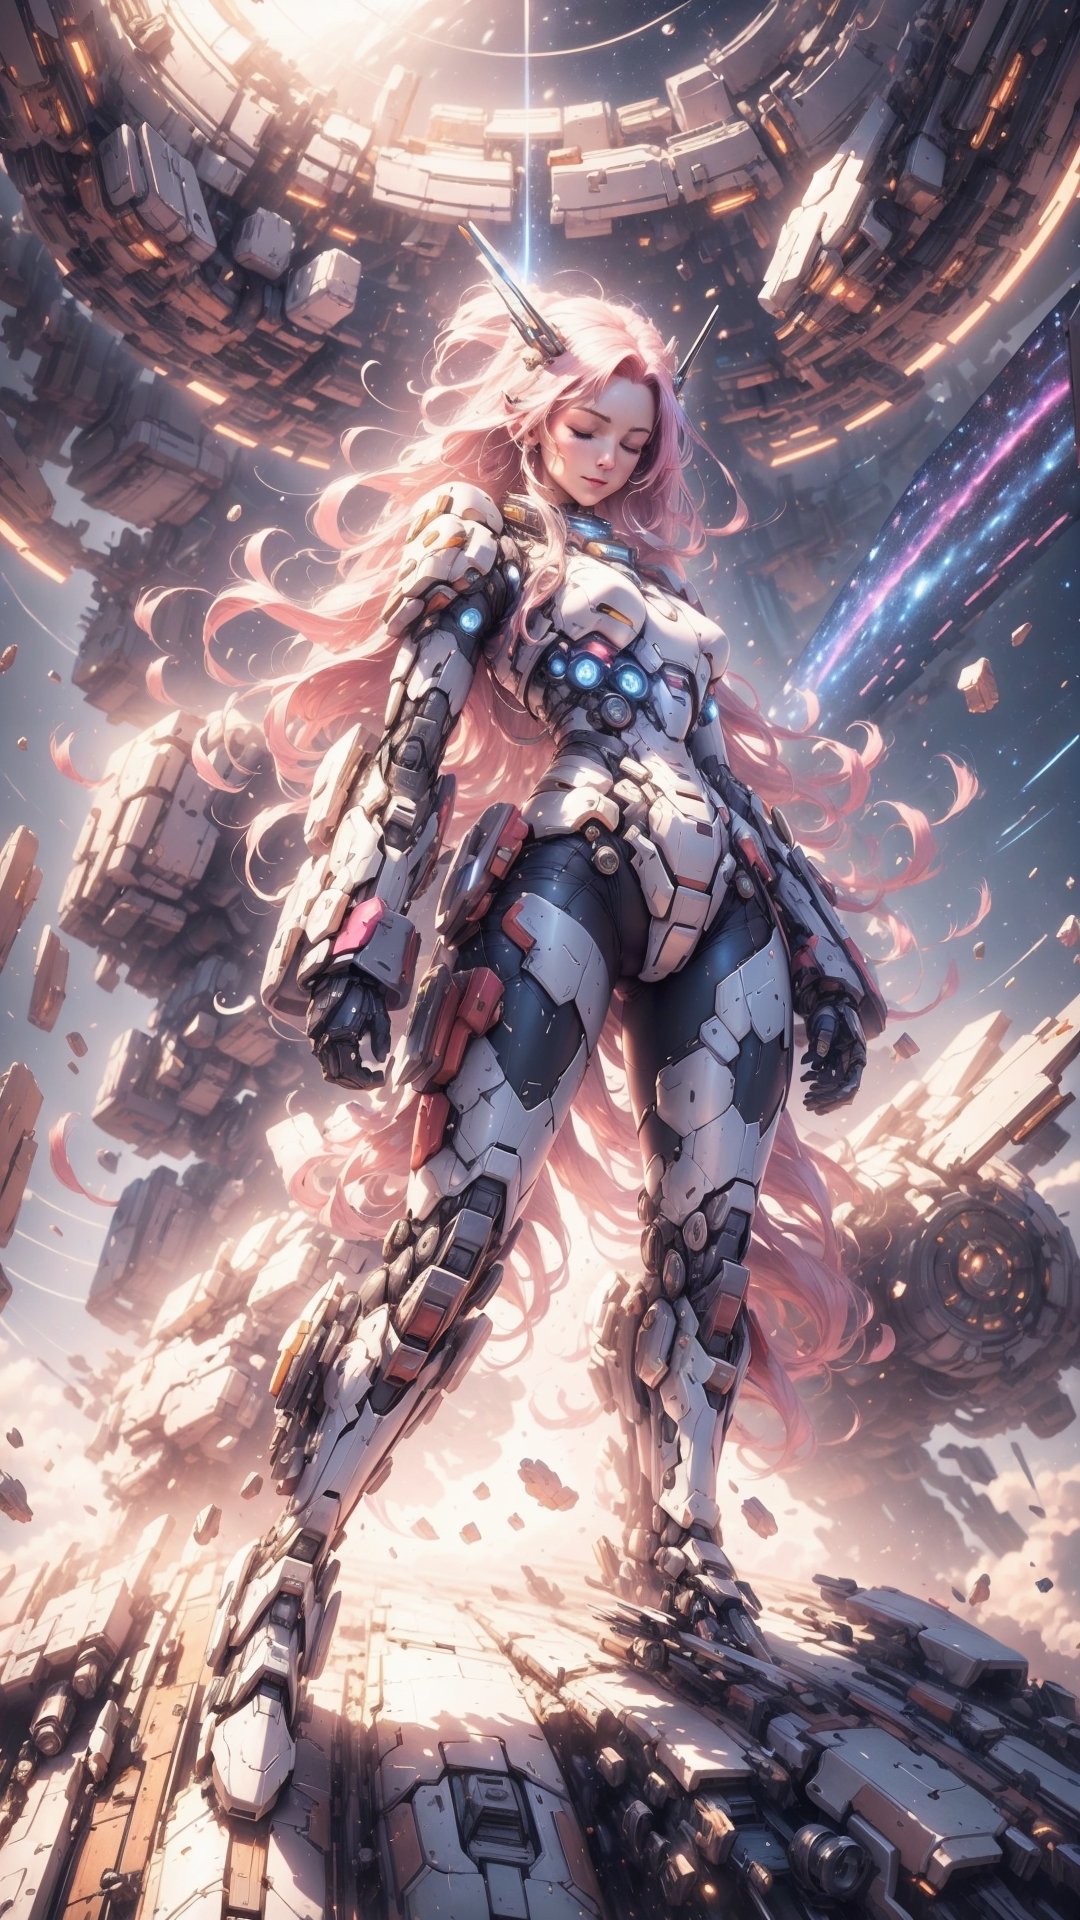 (4k), (masterpiece), (best quality),(extremely intricate), (realistic), (sharp focus), (award winning), (cinematic lighting), (extremely detailed), 

A young woman with long, flowing pink hair stands tall in the cockpit of her towering white mech suit, her face illuminated by the glow of the stars. The mech suit is a marvel of engineering, with sleek lines and powerful weaponry. The woman herself is a skilled warrior, trained in the arts of combat and piloting.
Her eyes closed and a serene smile on her face.

She is standing in front of a vast nebula, its swirling colors creating a breathtaking backdrop. The nebula is home to a variety of alien lifeforms, some of which are hostile to humanity. But the woman is not afraid. She is here to protect her people and to explore the unknown.

She raises her fist in a gesture of defiance, and her mech suit roars to life. She is ready to face whatever challenges the nebula may throw her way.

Details:

The woman is a space mecha pilot / space warrior.
She has long, flowing pink hair.
She is wearing a white bodytight spacesuit.
She is standing in the cockpit of her towering white mech suit.
She is standing in front of a vast nebula.
She raises her fist in a gesture of defiance.
Her eyes closed and a serene smile on her face

,mecha,EpicSky,DonMPl4sm4T3chXL 